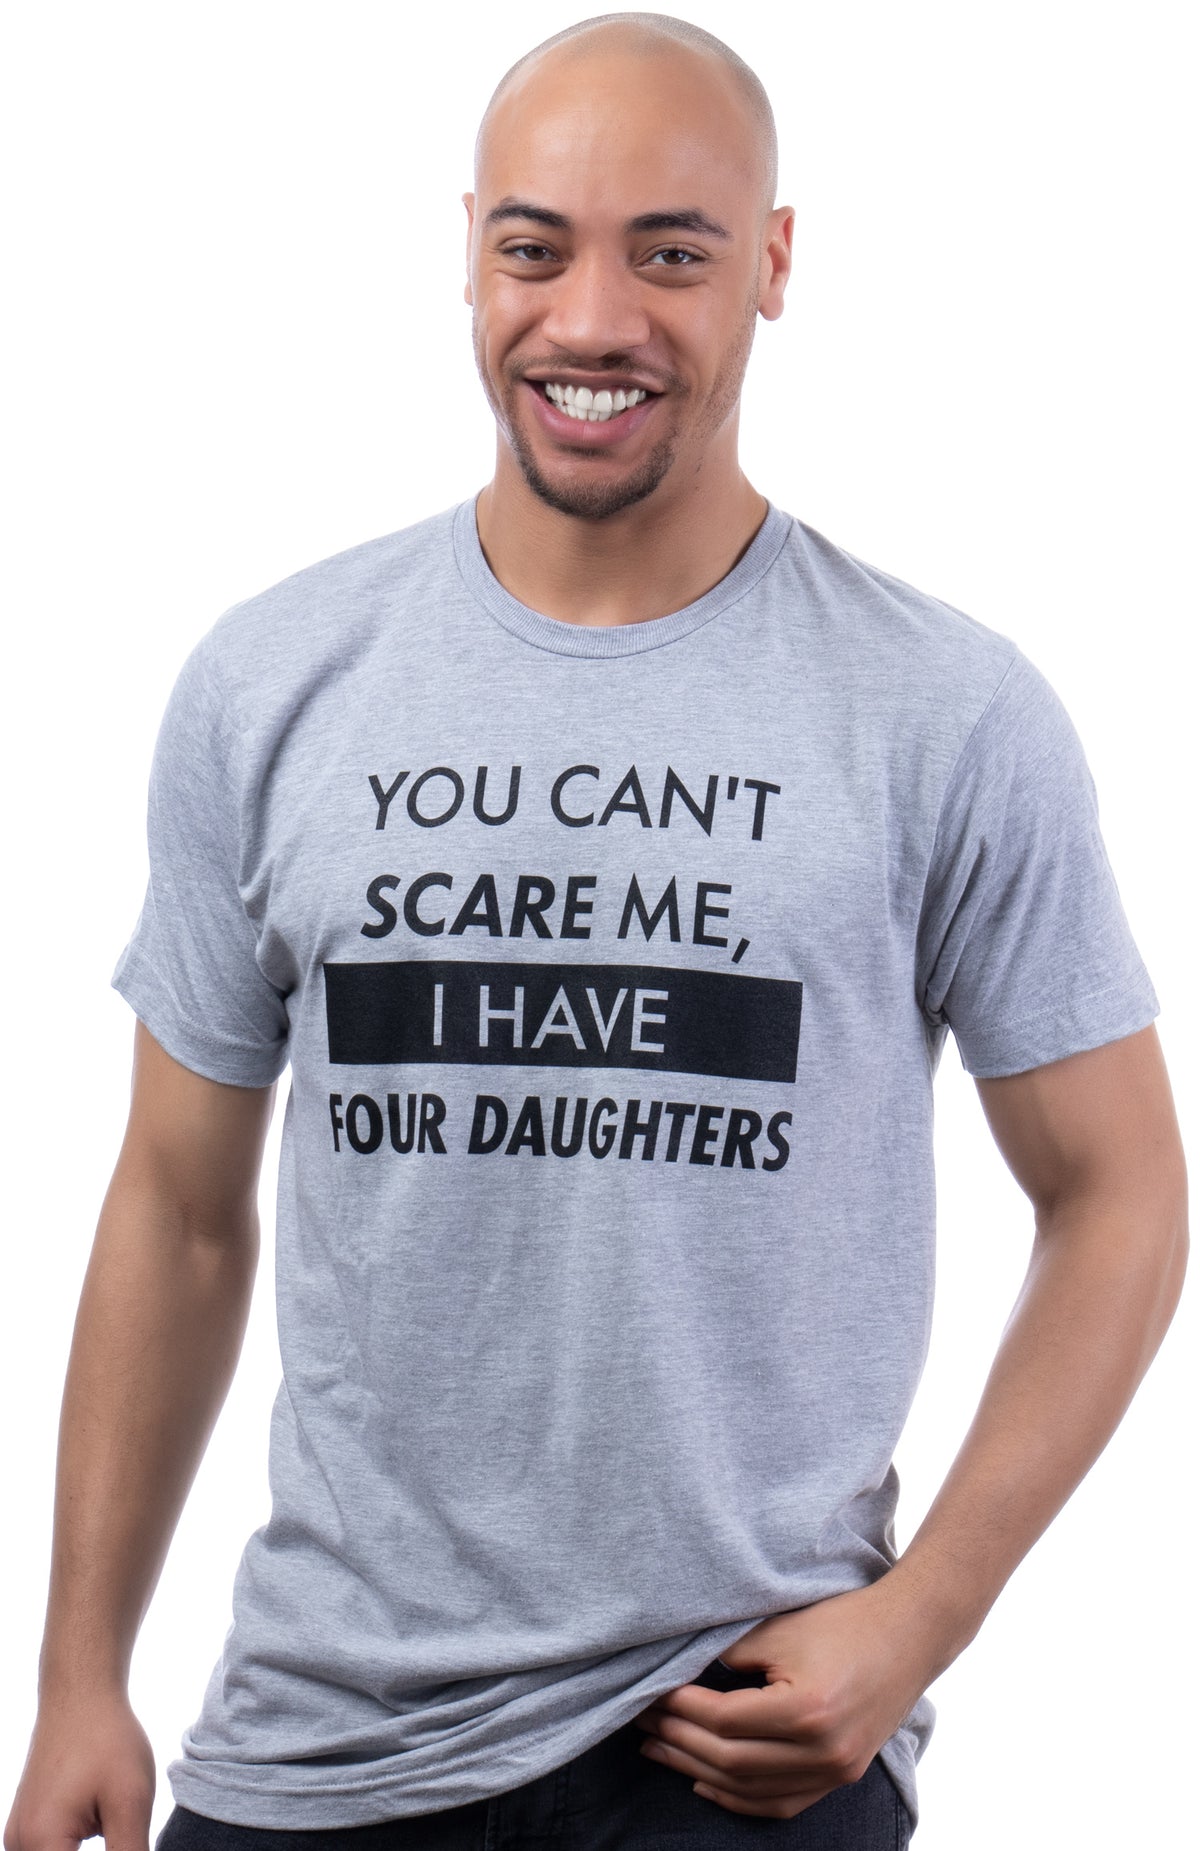 You Can't Scare Me, I Have Four Daughters | Funny Dad Humor Tee Shirt Daddy Cute Joke Dude Men T-Shirt